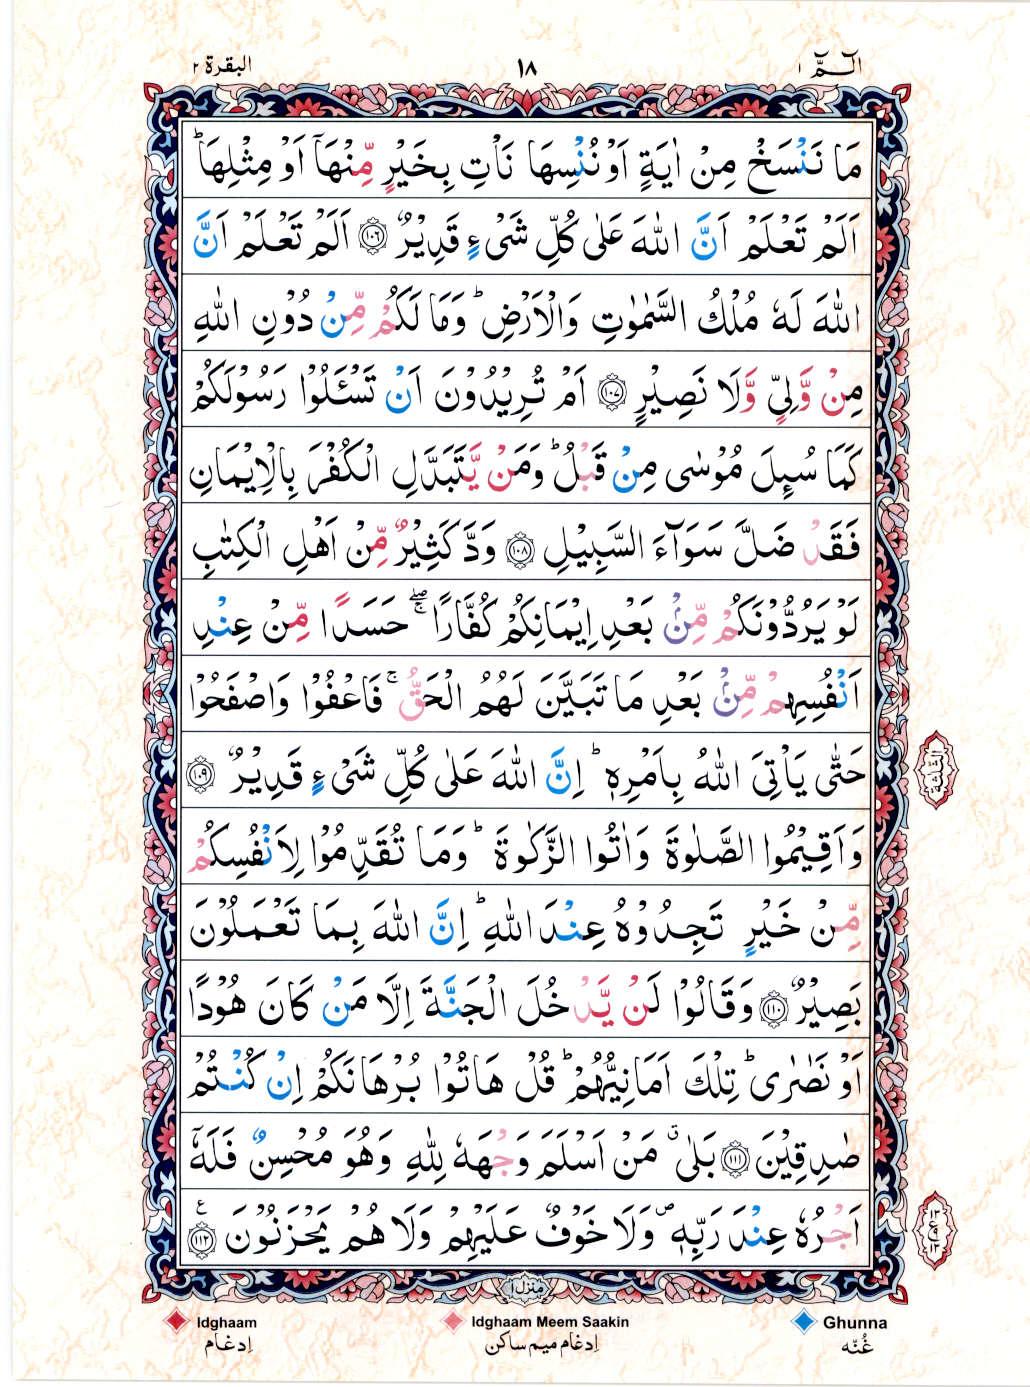 Read 15 Lines Coloured Coded Quran Part 1 Page No 18, Practice Quran